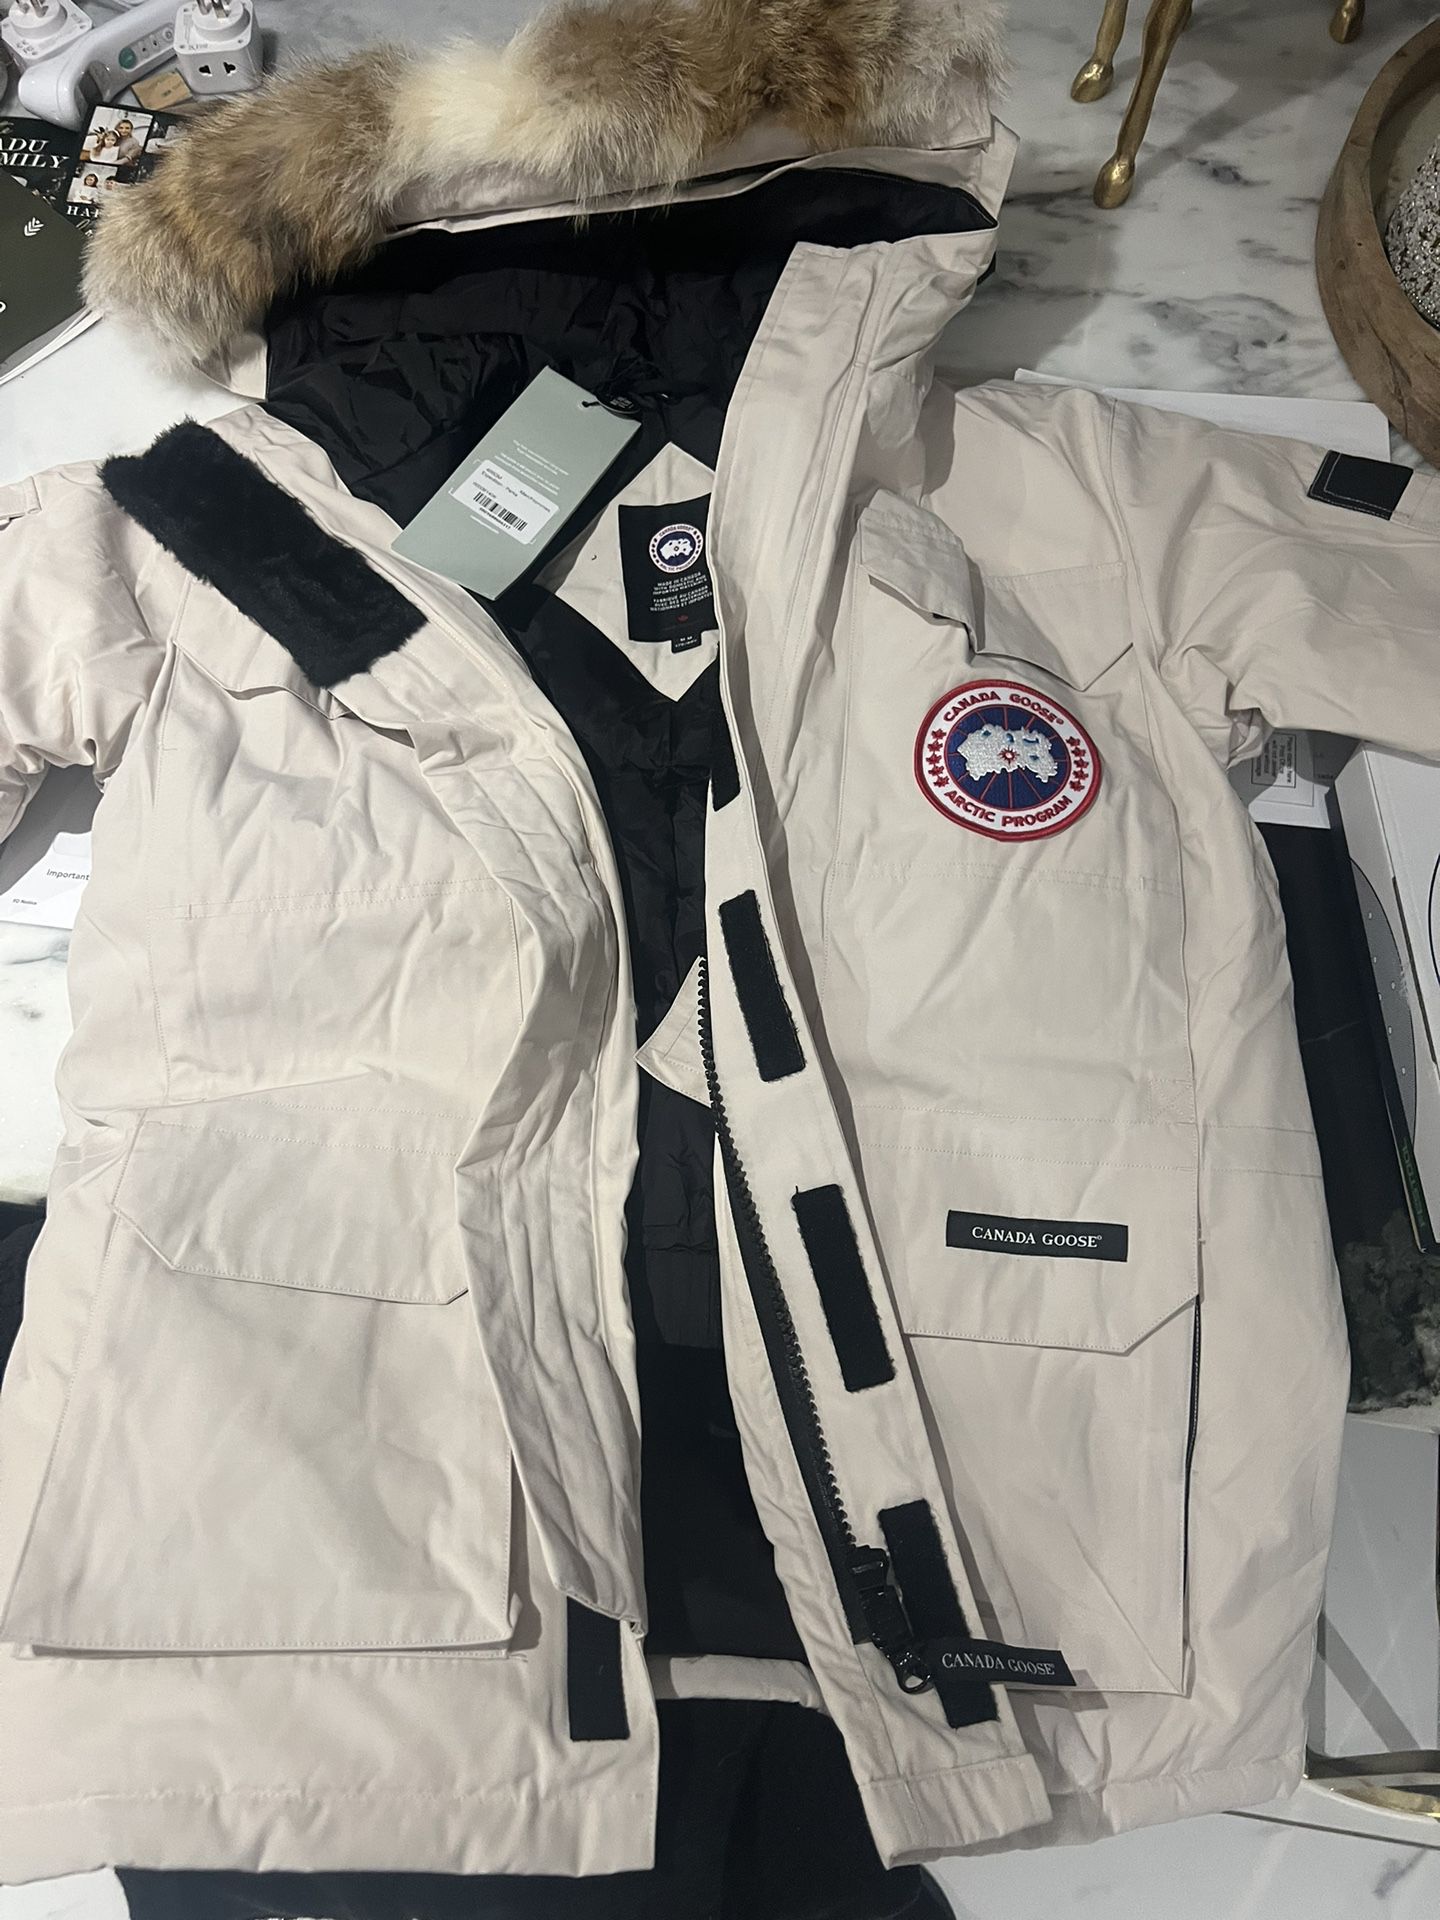 Canada Goose Expedition Jacket Size M